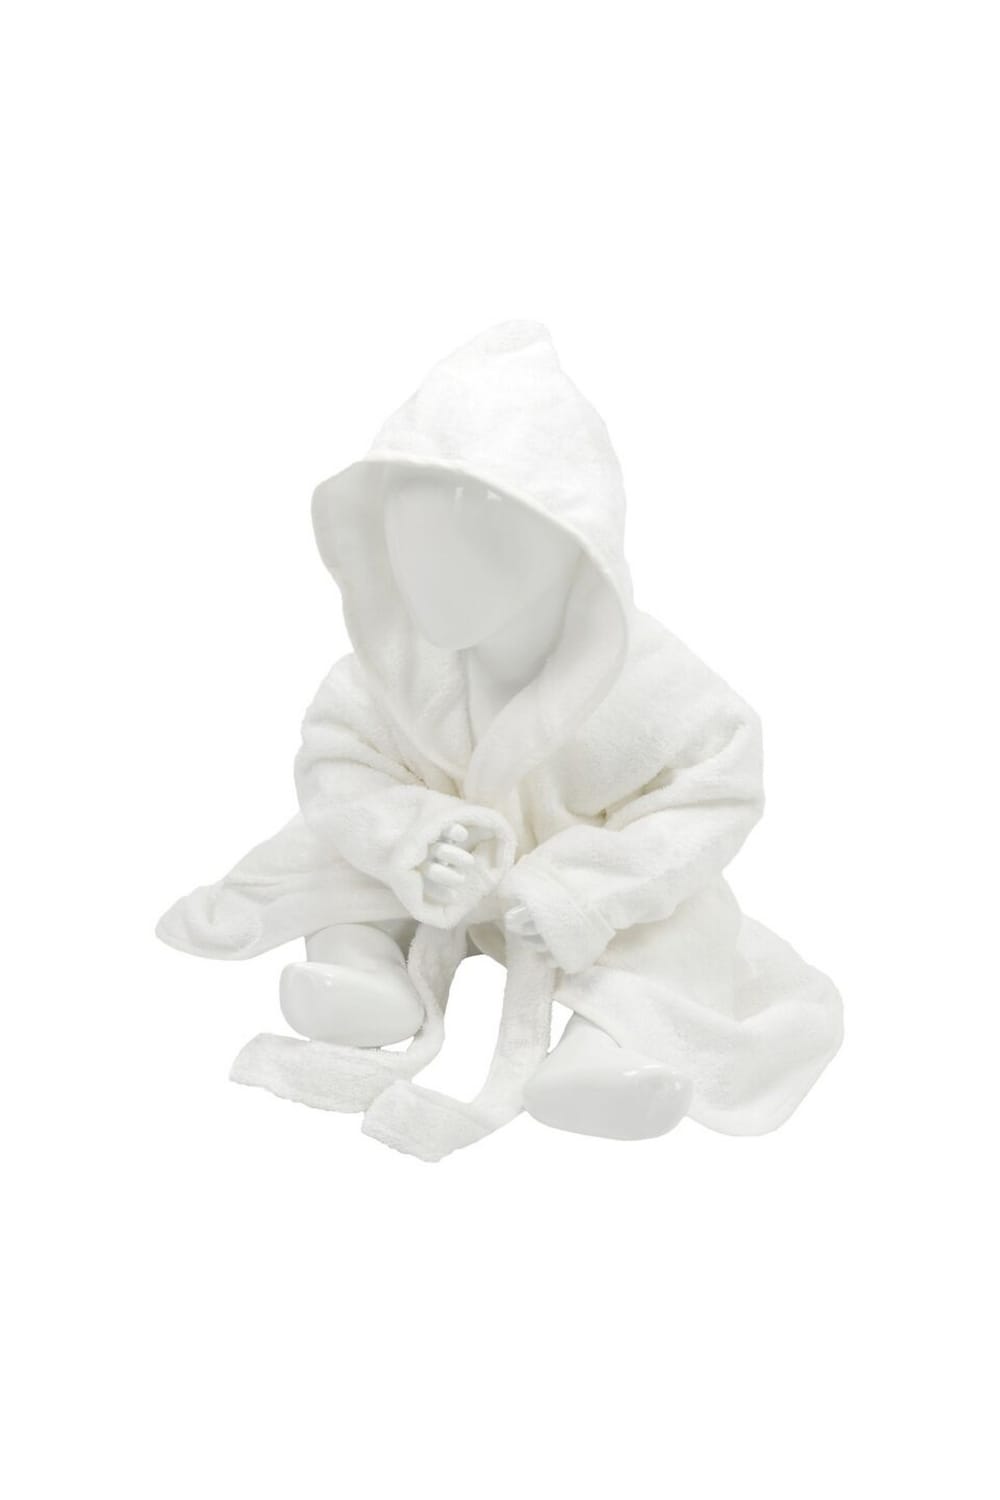 A&R Towels Baby/Toddler Babiezz Hooded Bathrobe (White) (12/24 Months)